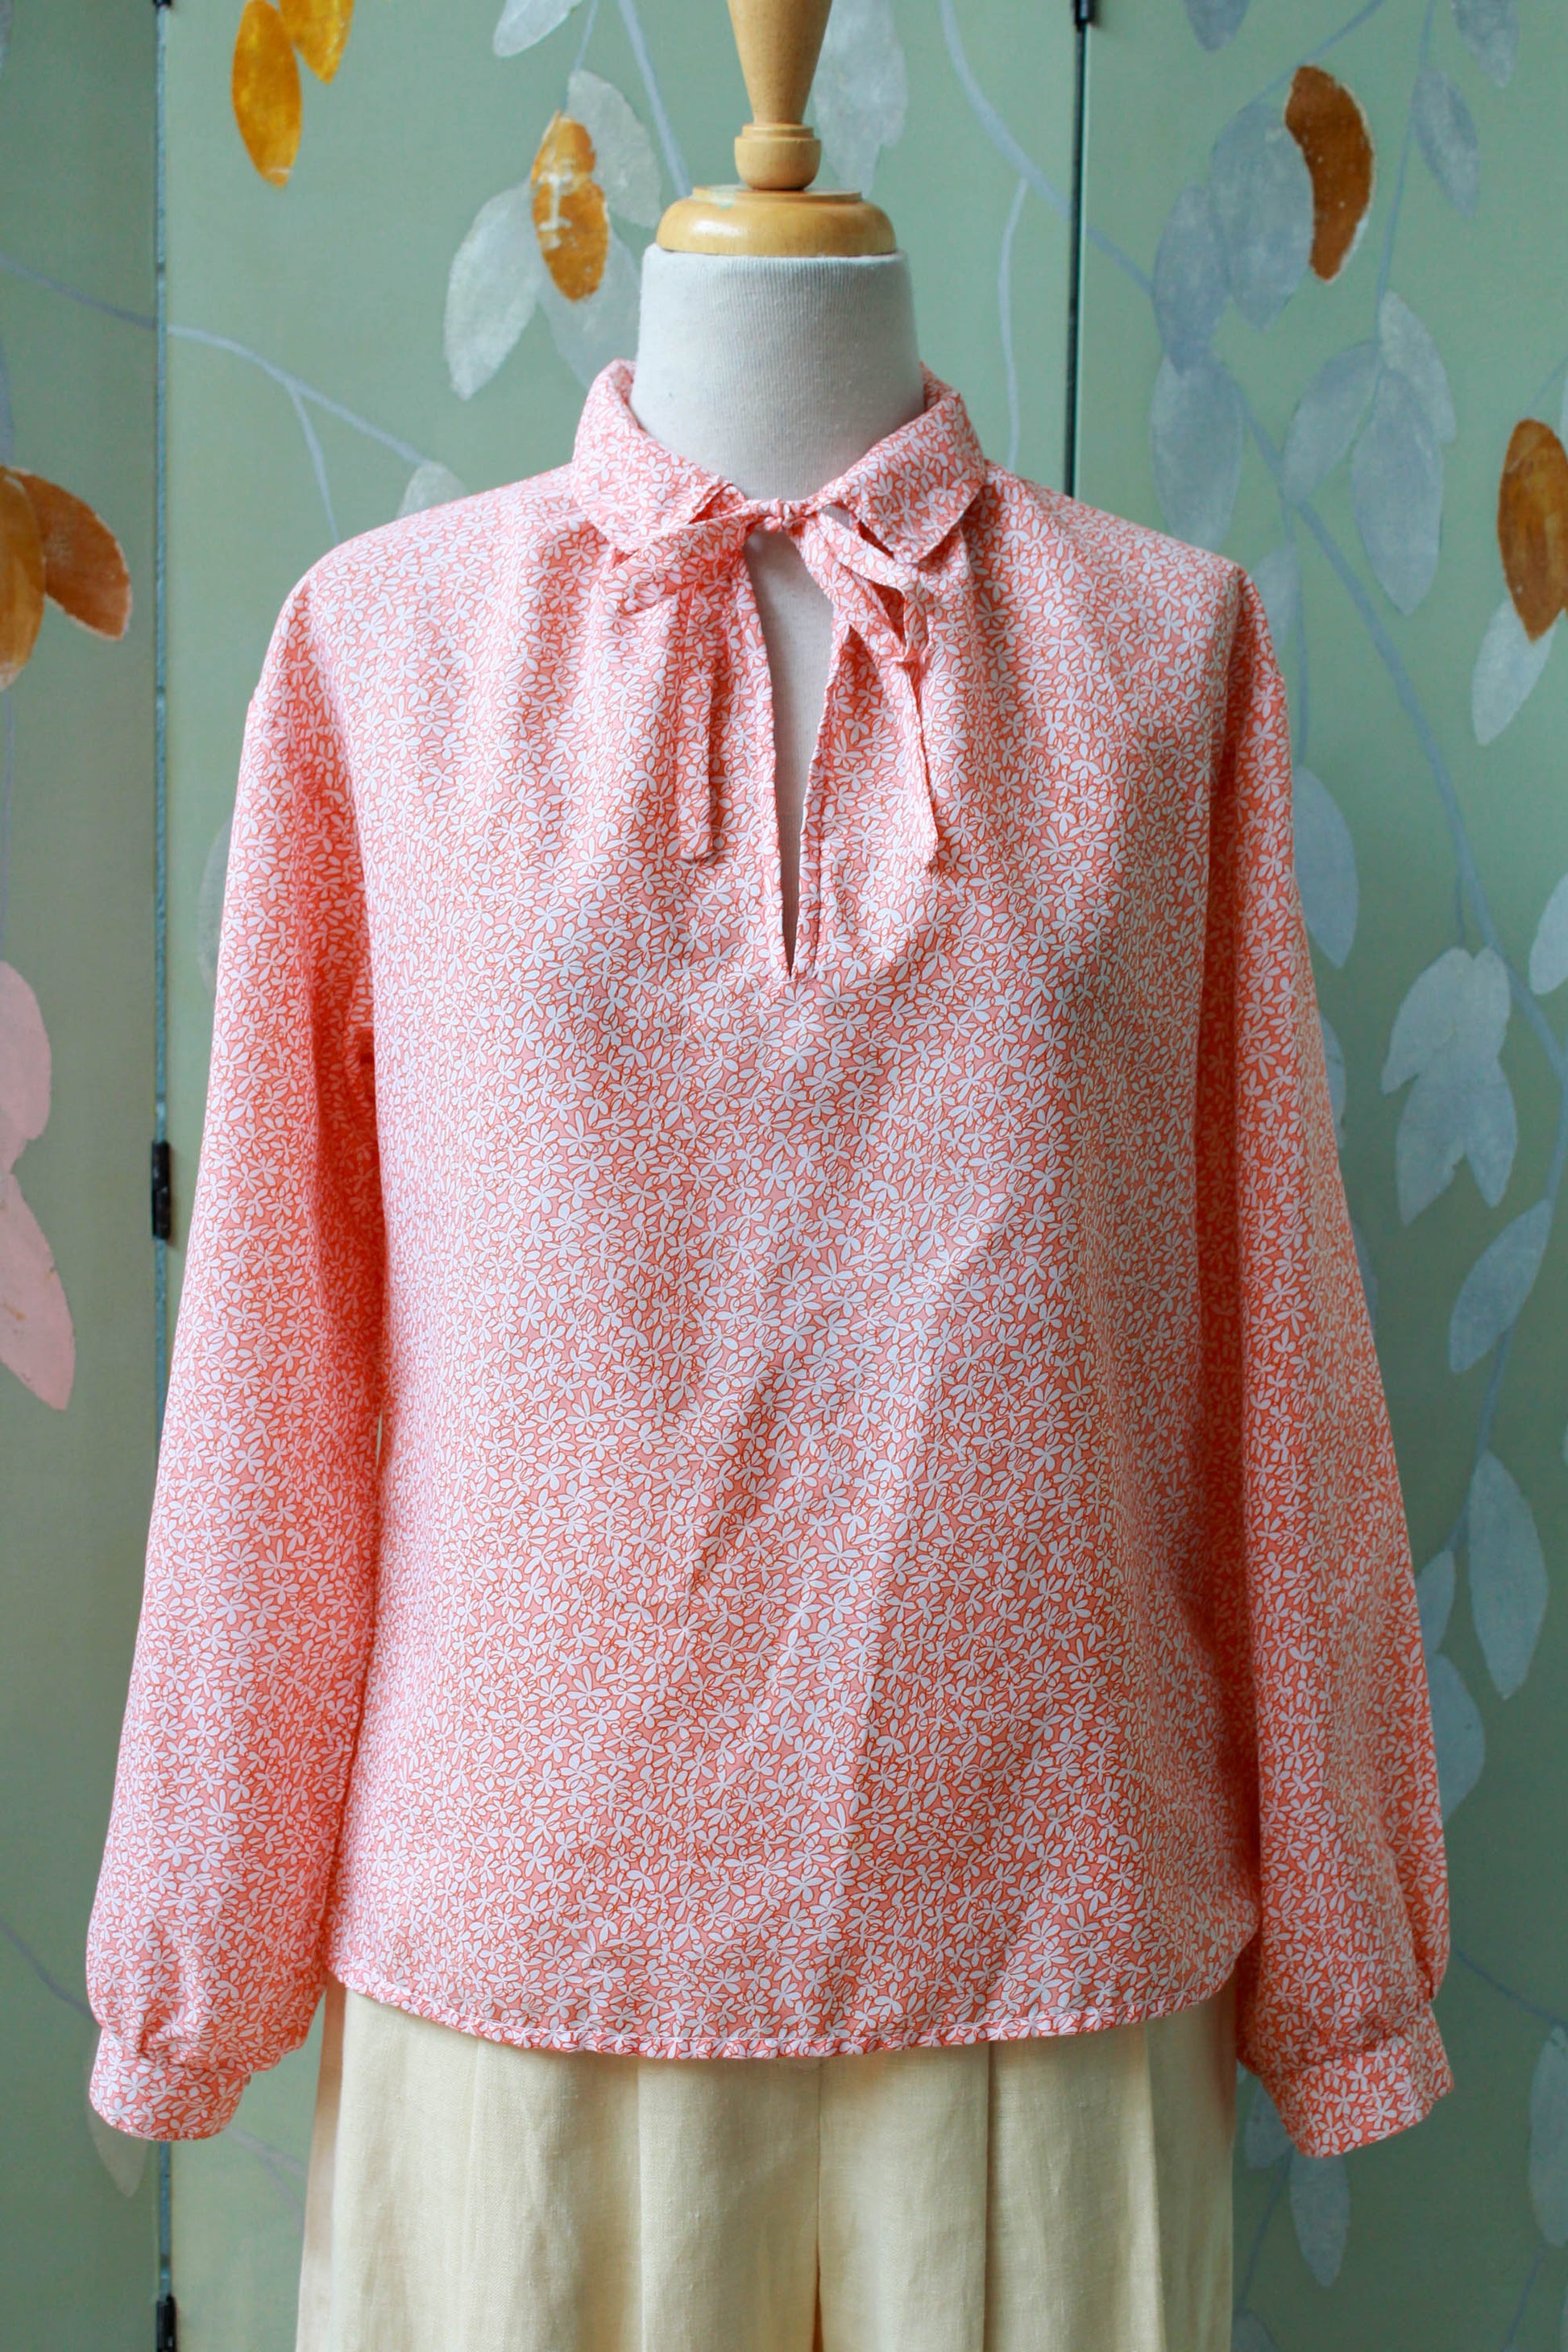 1980s holt renfrew orange and white micro floral print blouse with collar and tie at the neck, long sleeves vintage